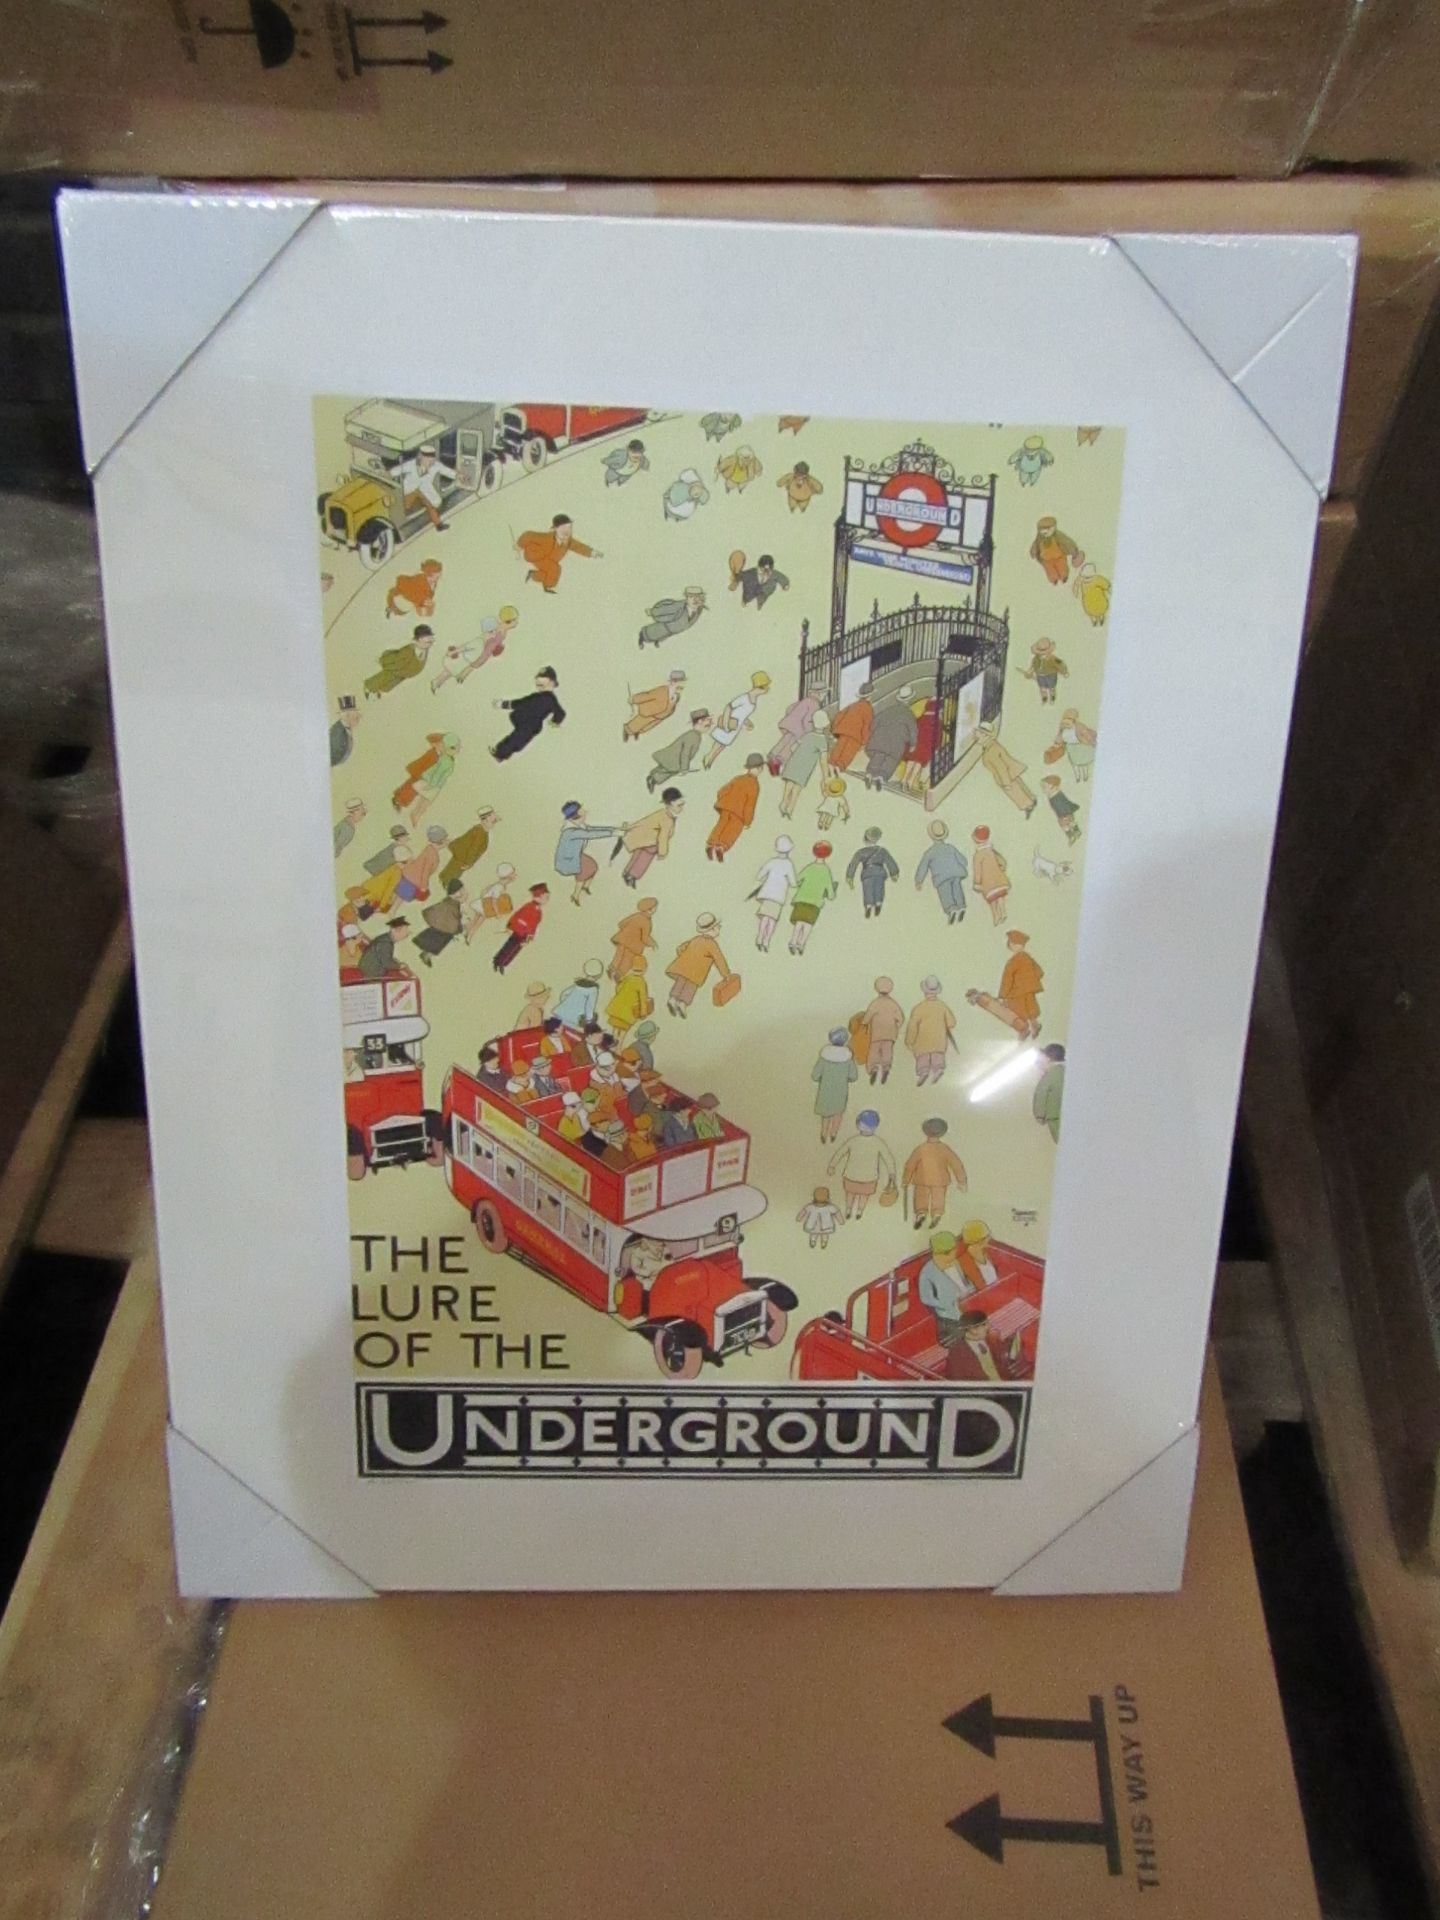 1 x box of 6 "Lure Of The Underground" Canvas size 50cm x 40cm new & packaged